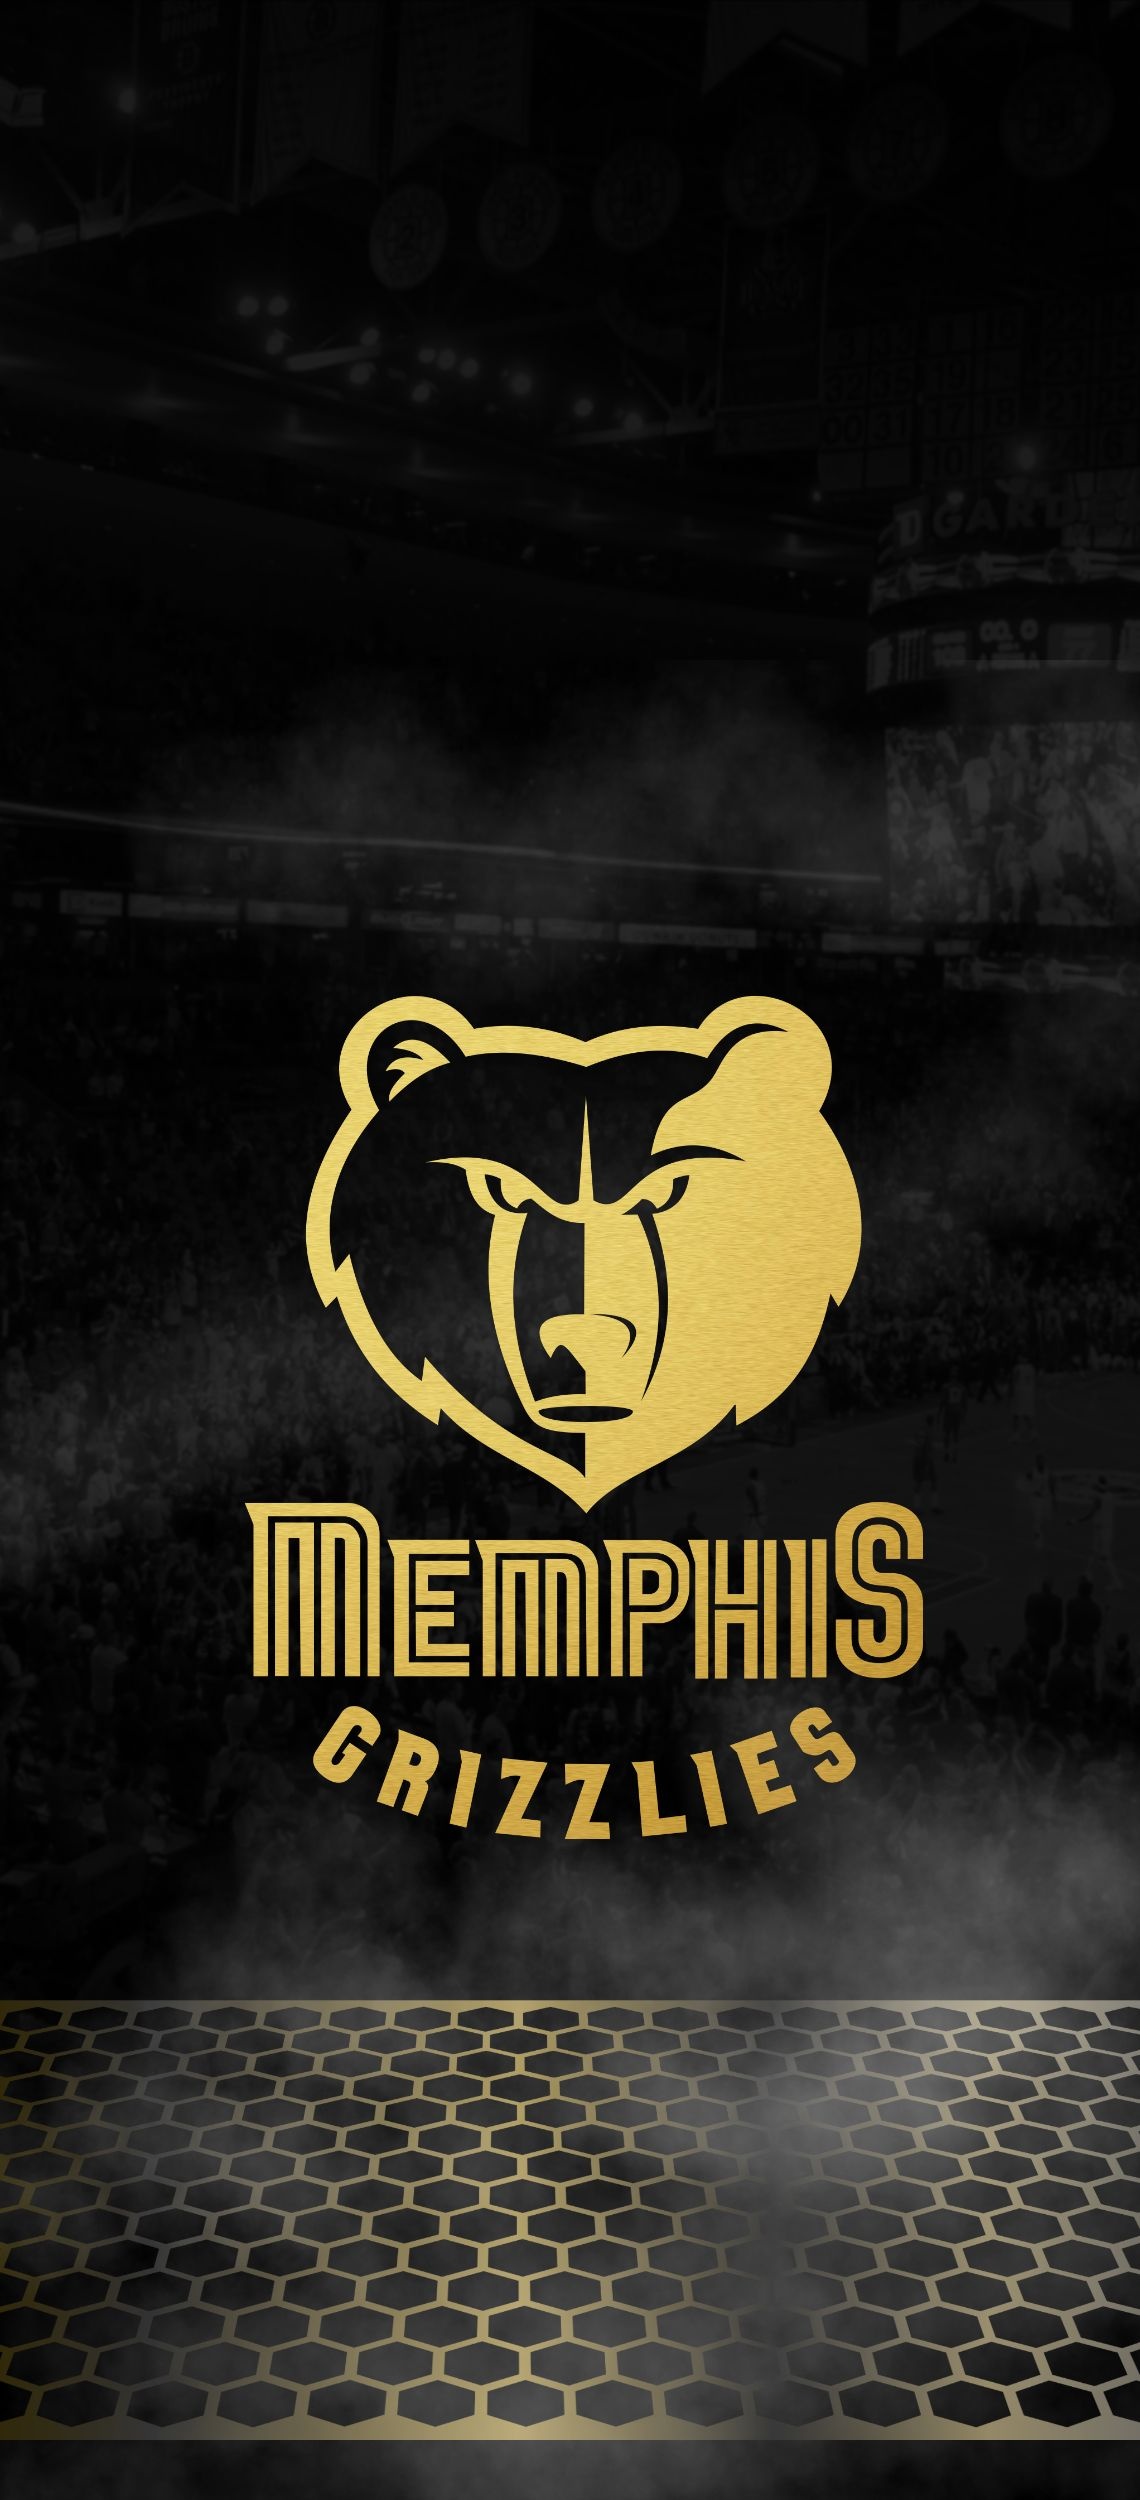 Memphis Grizzlies, Wallpaper background, Basketball team, Grizzly imagery, 1140x2500 HD Handy